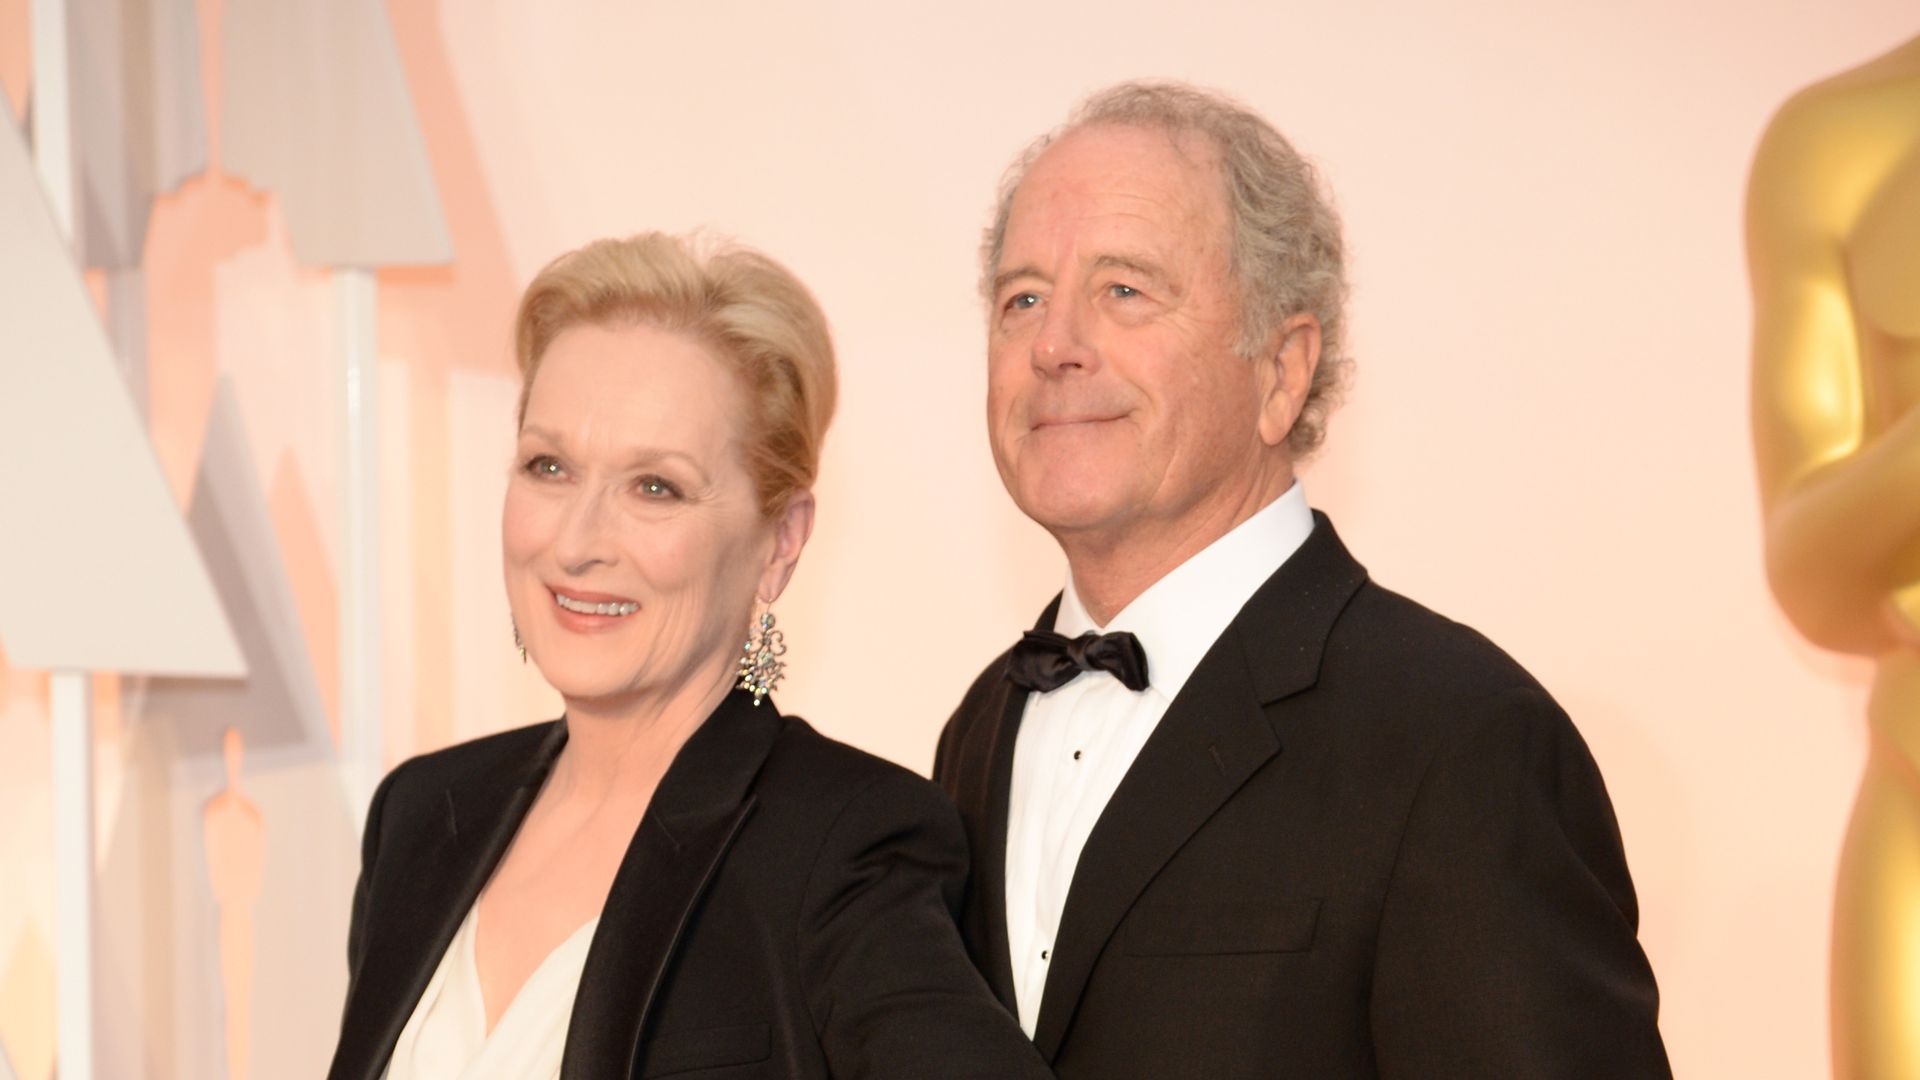 Meryl Streep and Don Gummer attend the 87th Annual Academy Awards at Hollywood & Highland Center on February 22, 2015 in Hollywood, California